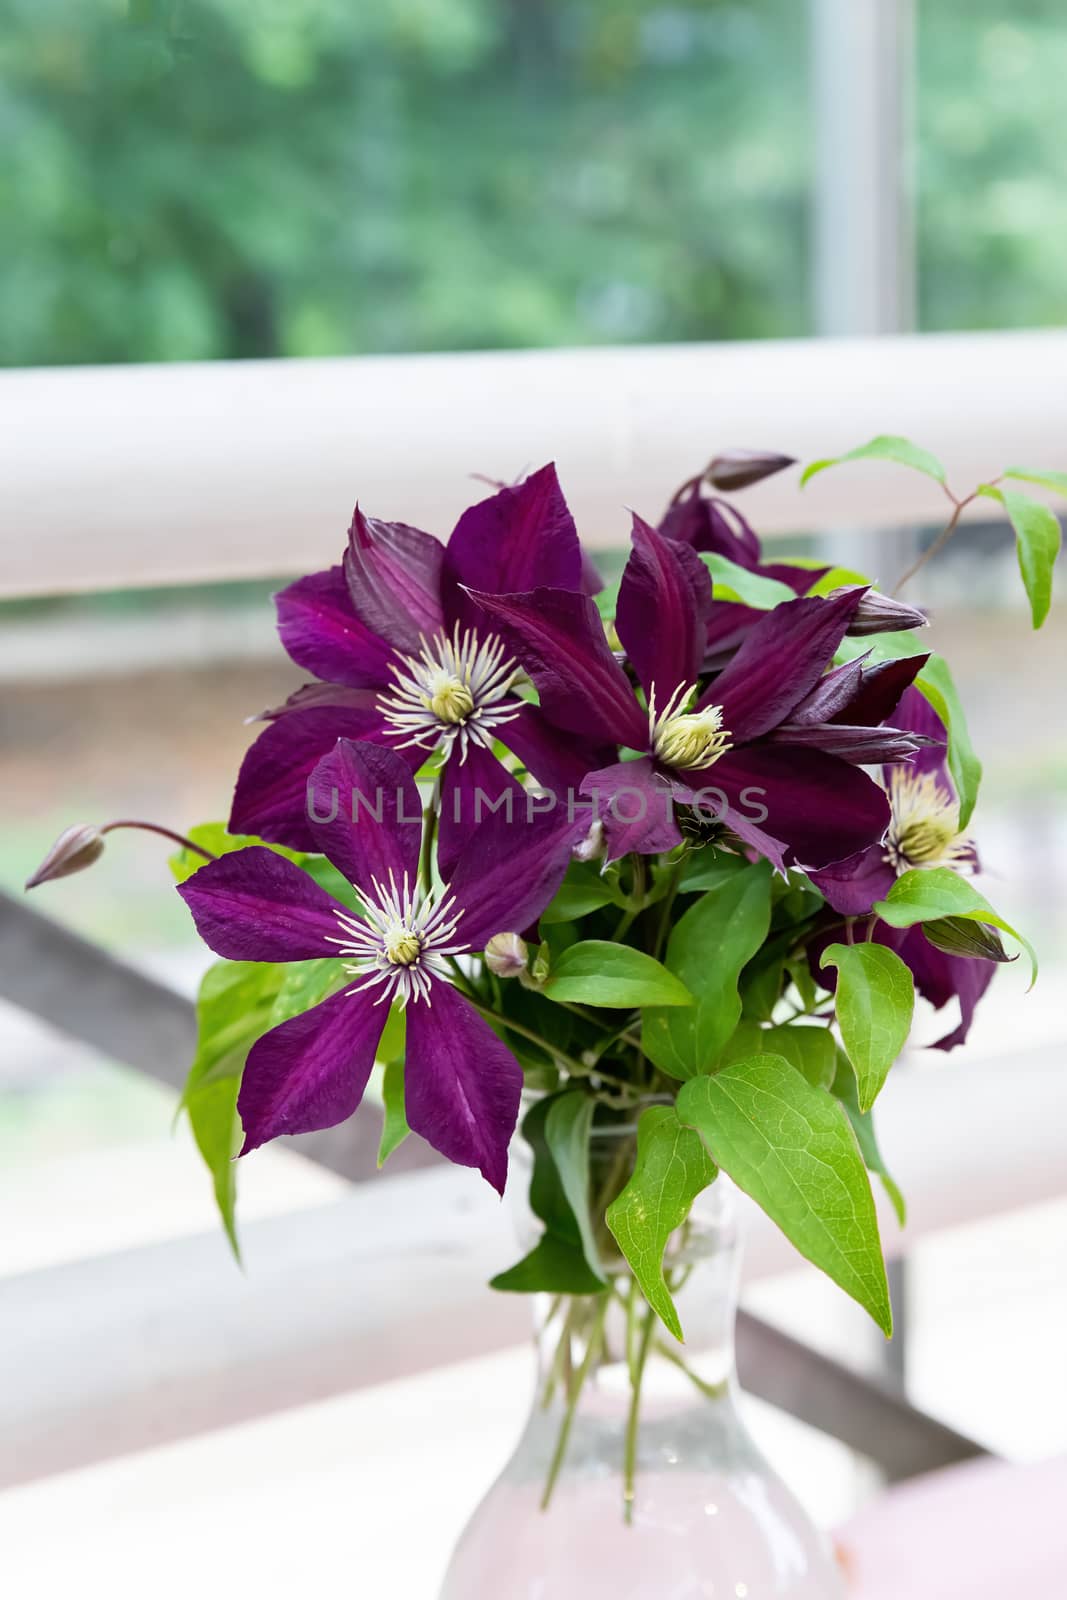 a bouquet of lilac clematis flowers in a glass vase that stands on the window